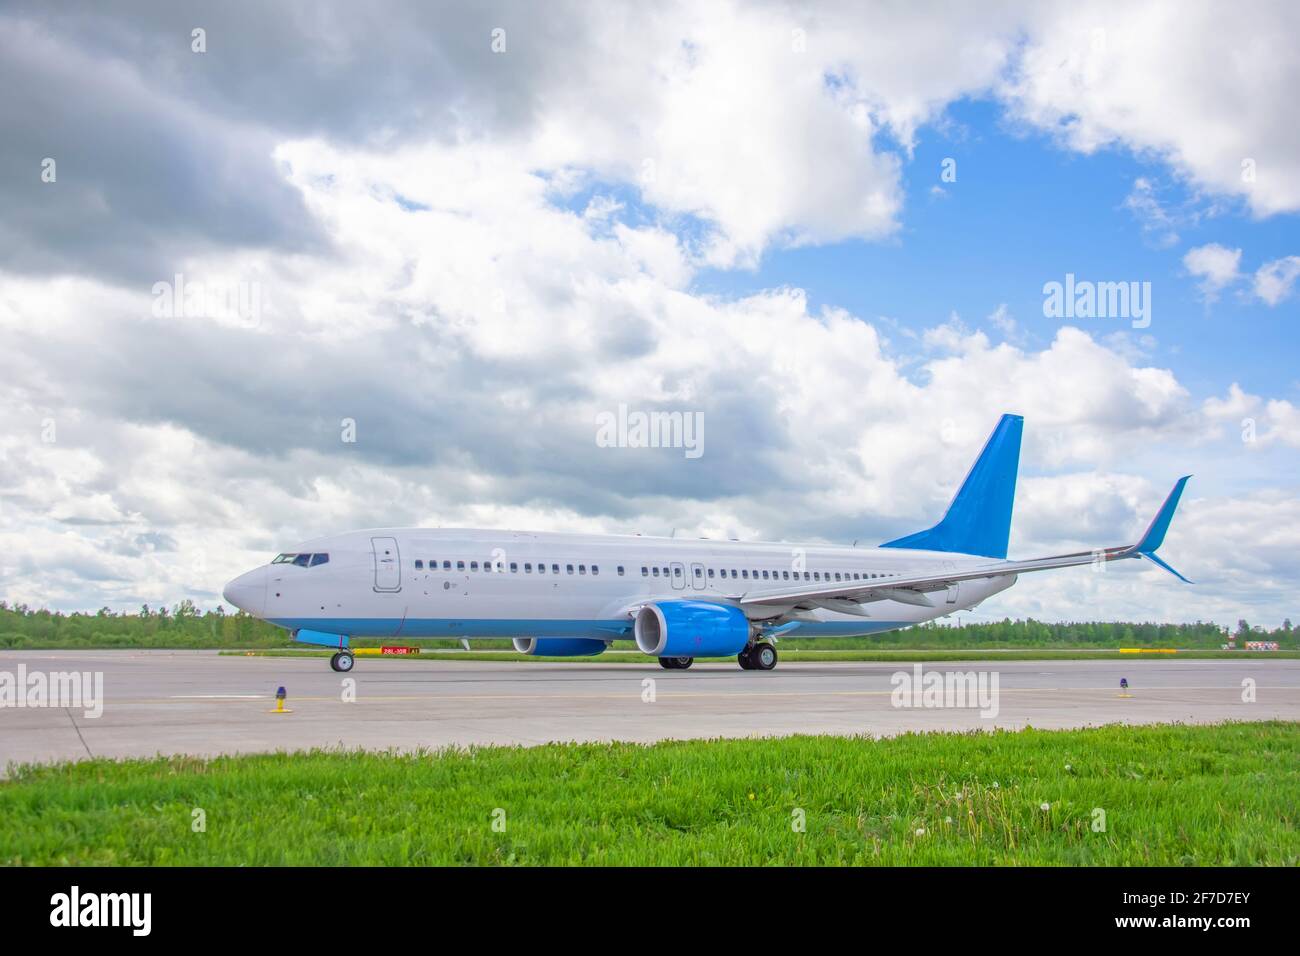 Airplane on airport taxiway bright green grass and scenic blue sky with clouds Stock Photo